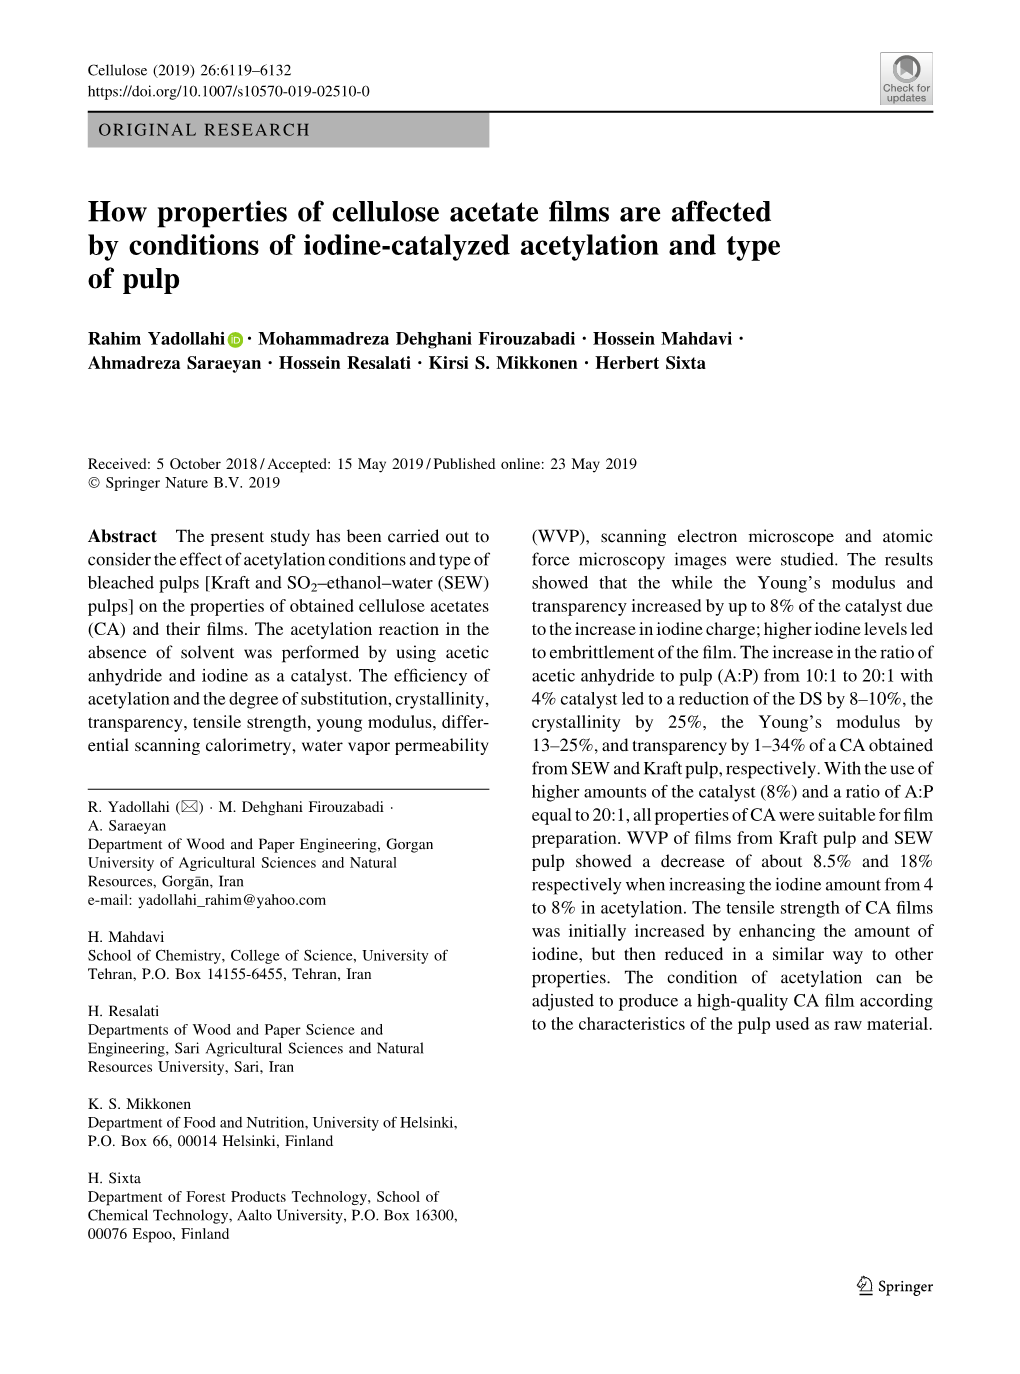 How Properties of Cellulose Acetate Films Are Affected by Conditions Of